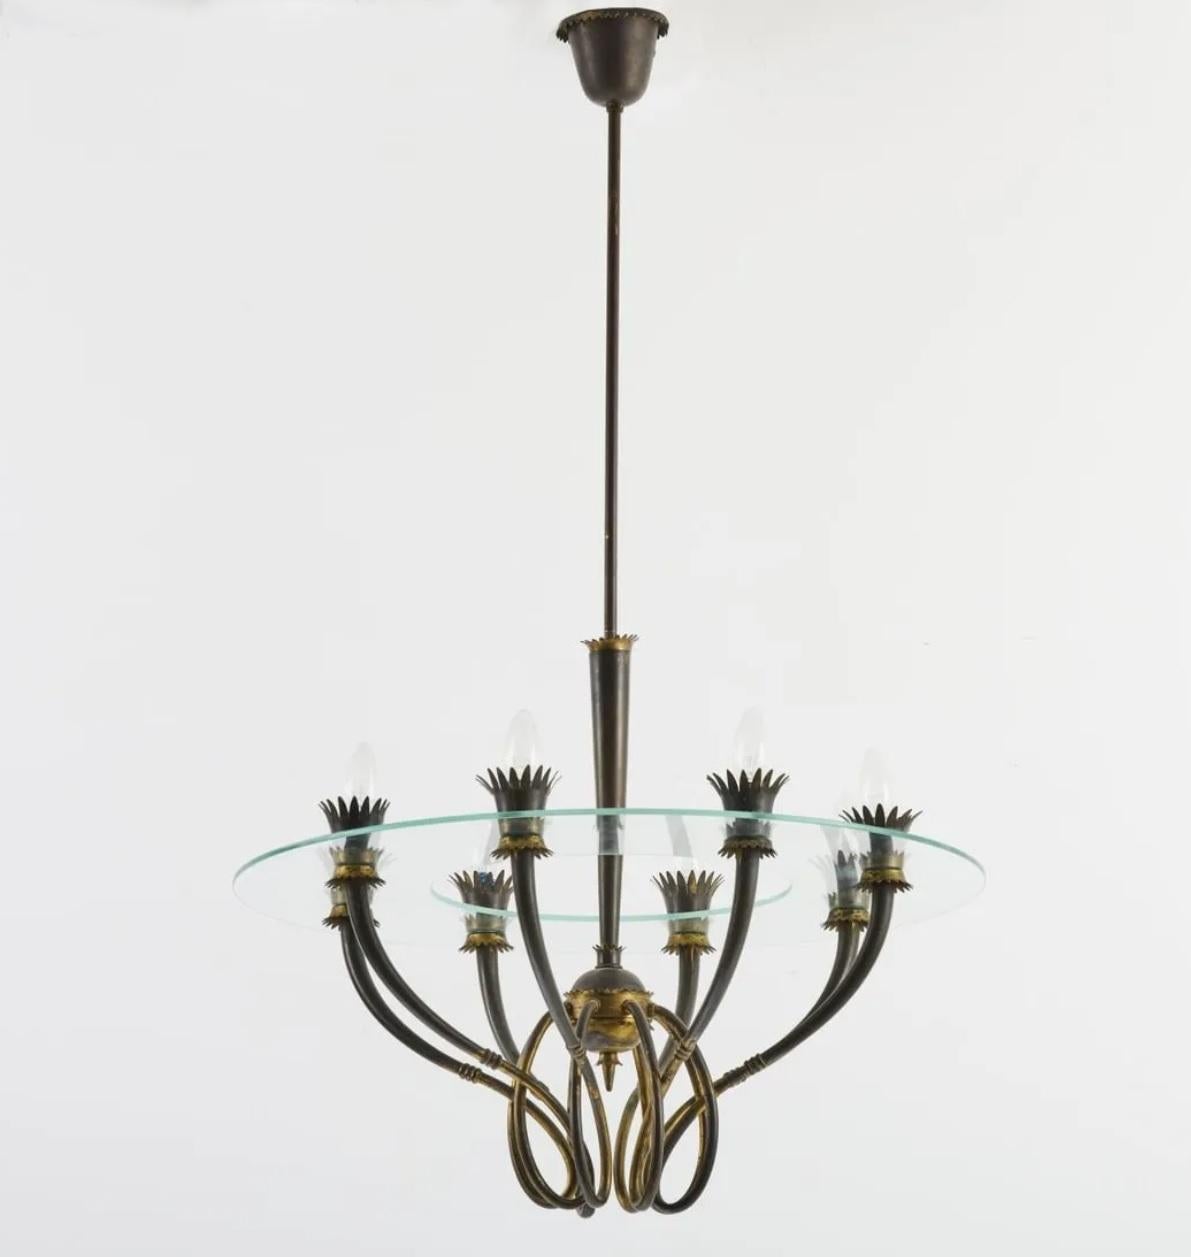 Midcentury Italian Patinated Brass Fontana Arte Pendant Light, attributed to Pietro Chiesa, 1941. 

Sculpted from patinated brass tubing and sheeting, a ring of transparent art glass encircles the lights. 